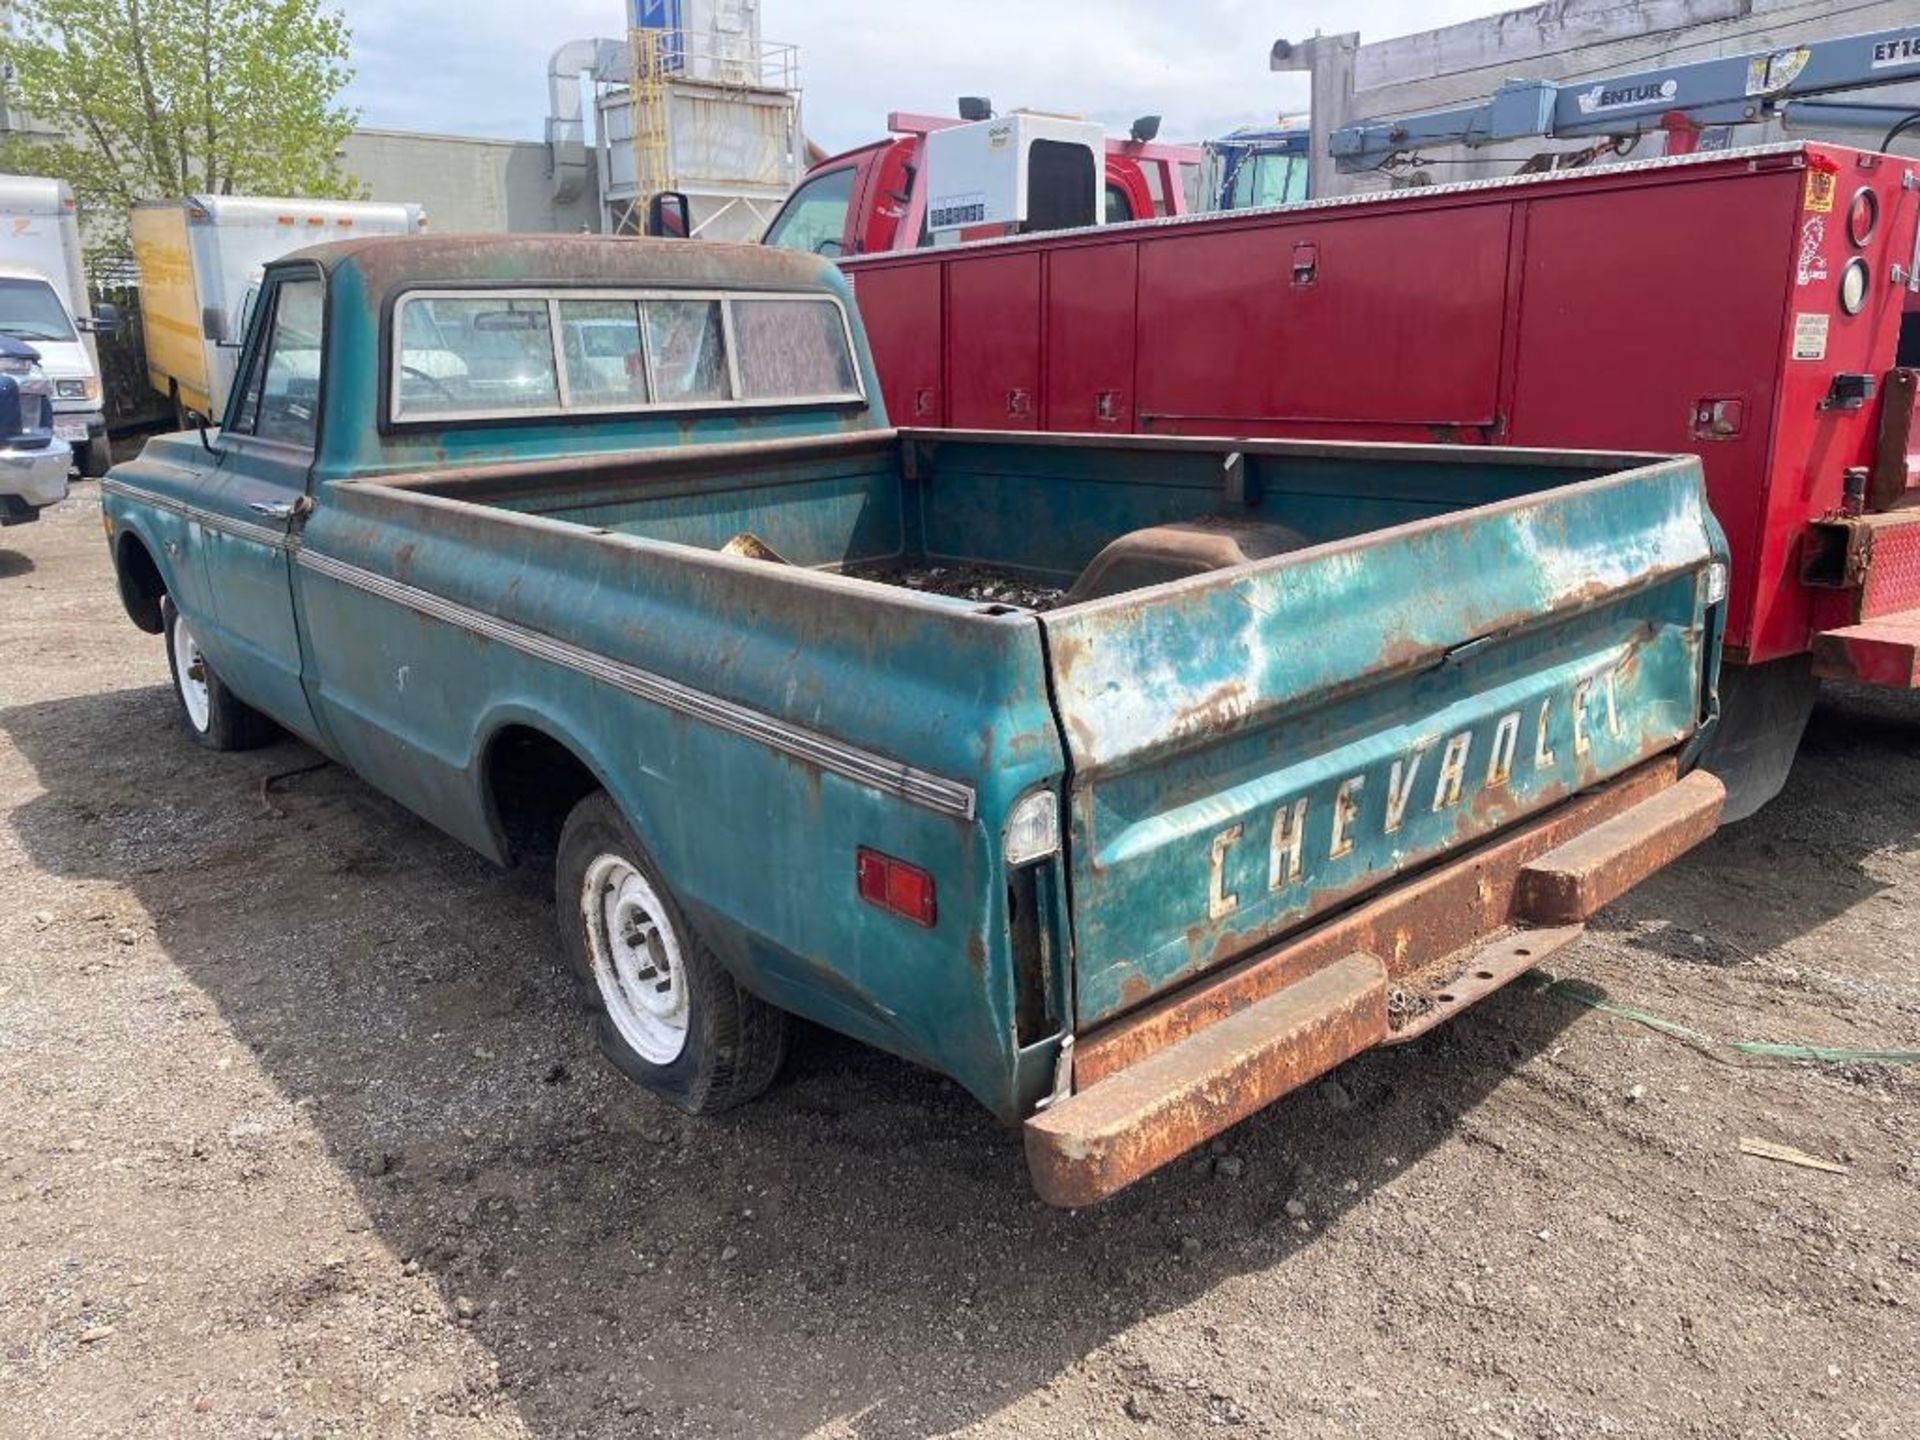 1970 C/10 Pickup Truck (for parts) - Image 8 of 10